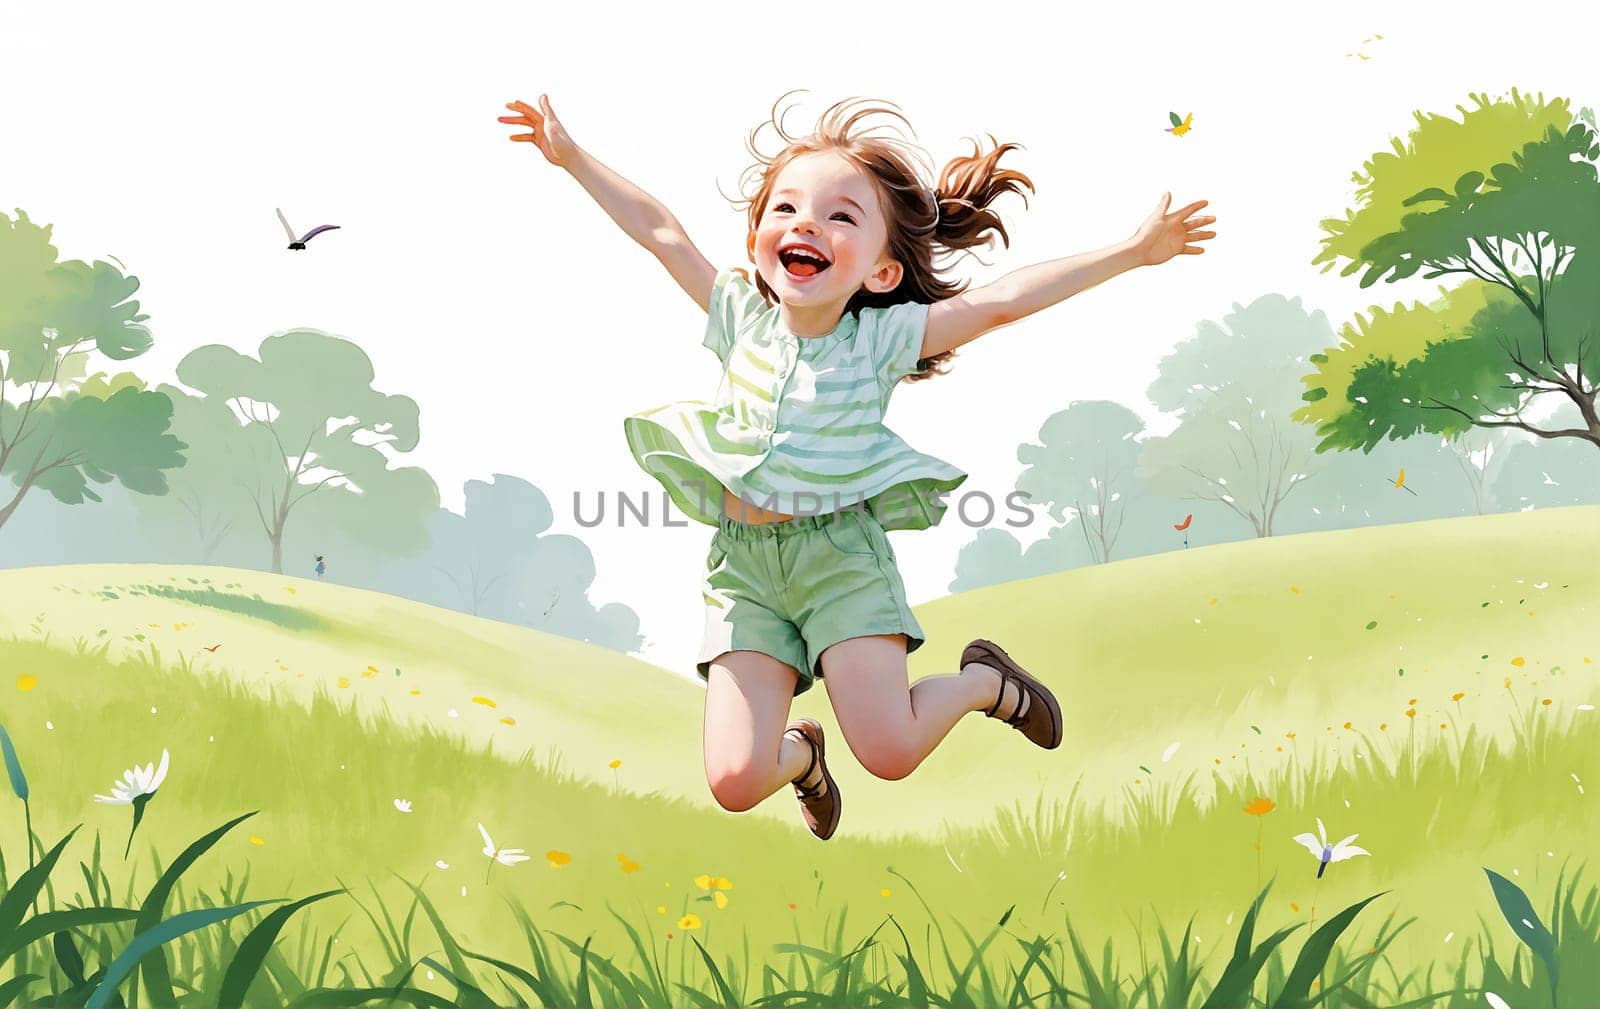 A young girl with brown hair jumps in the air with a joyous expression, arms outstretched, against a background of green grass, trees, and a white sky - Generative AI